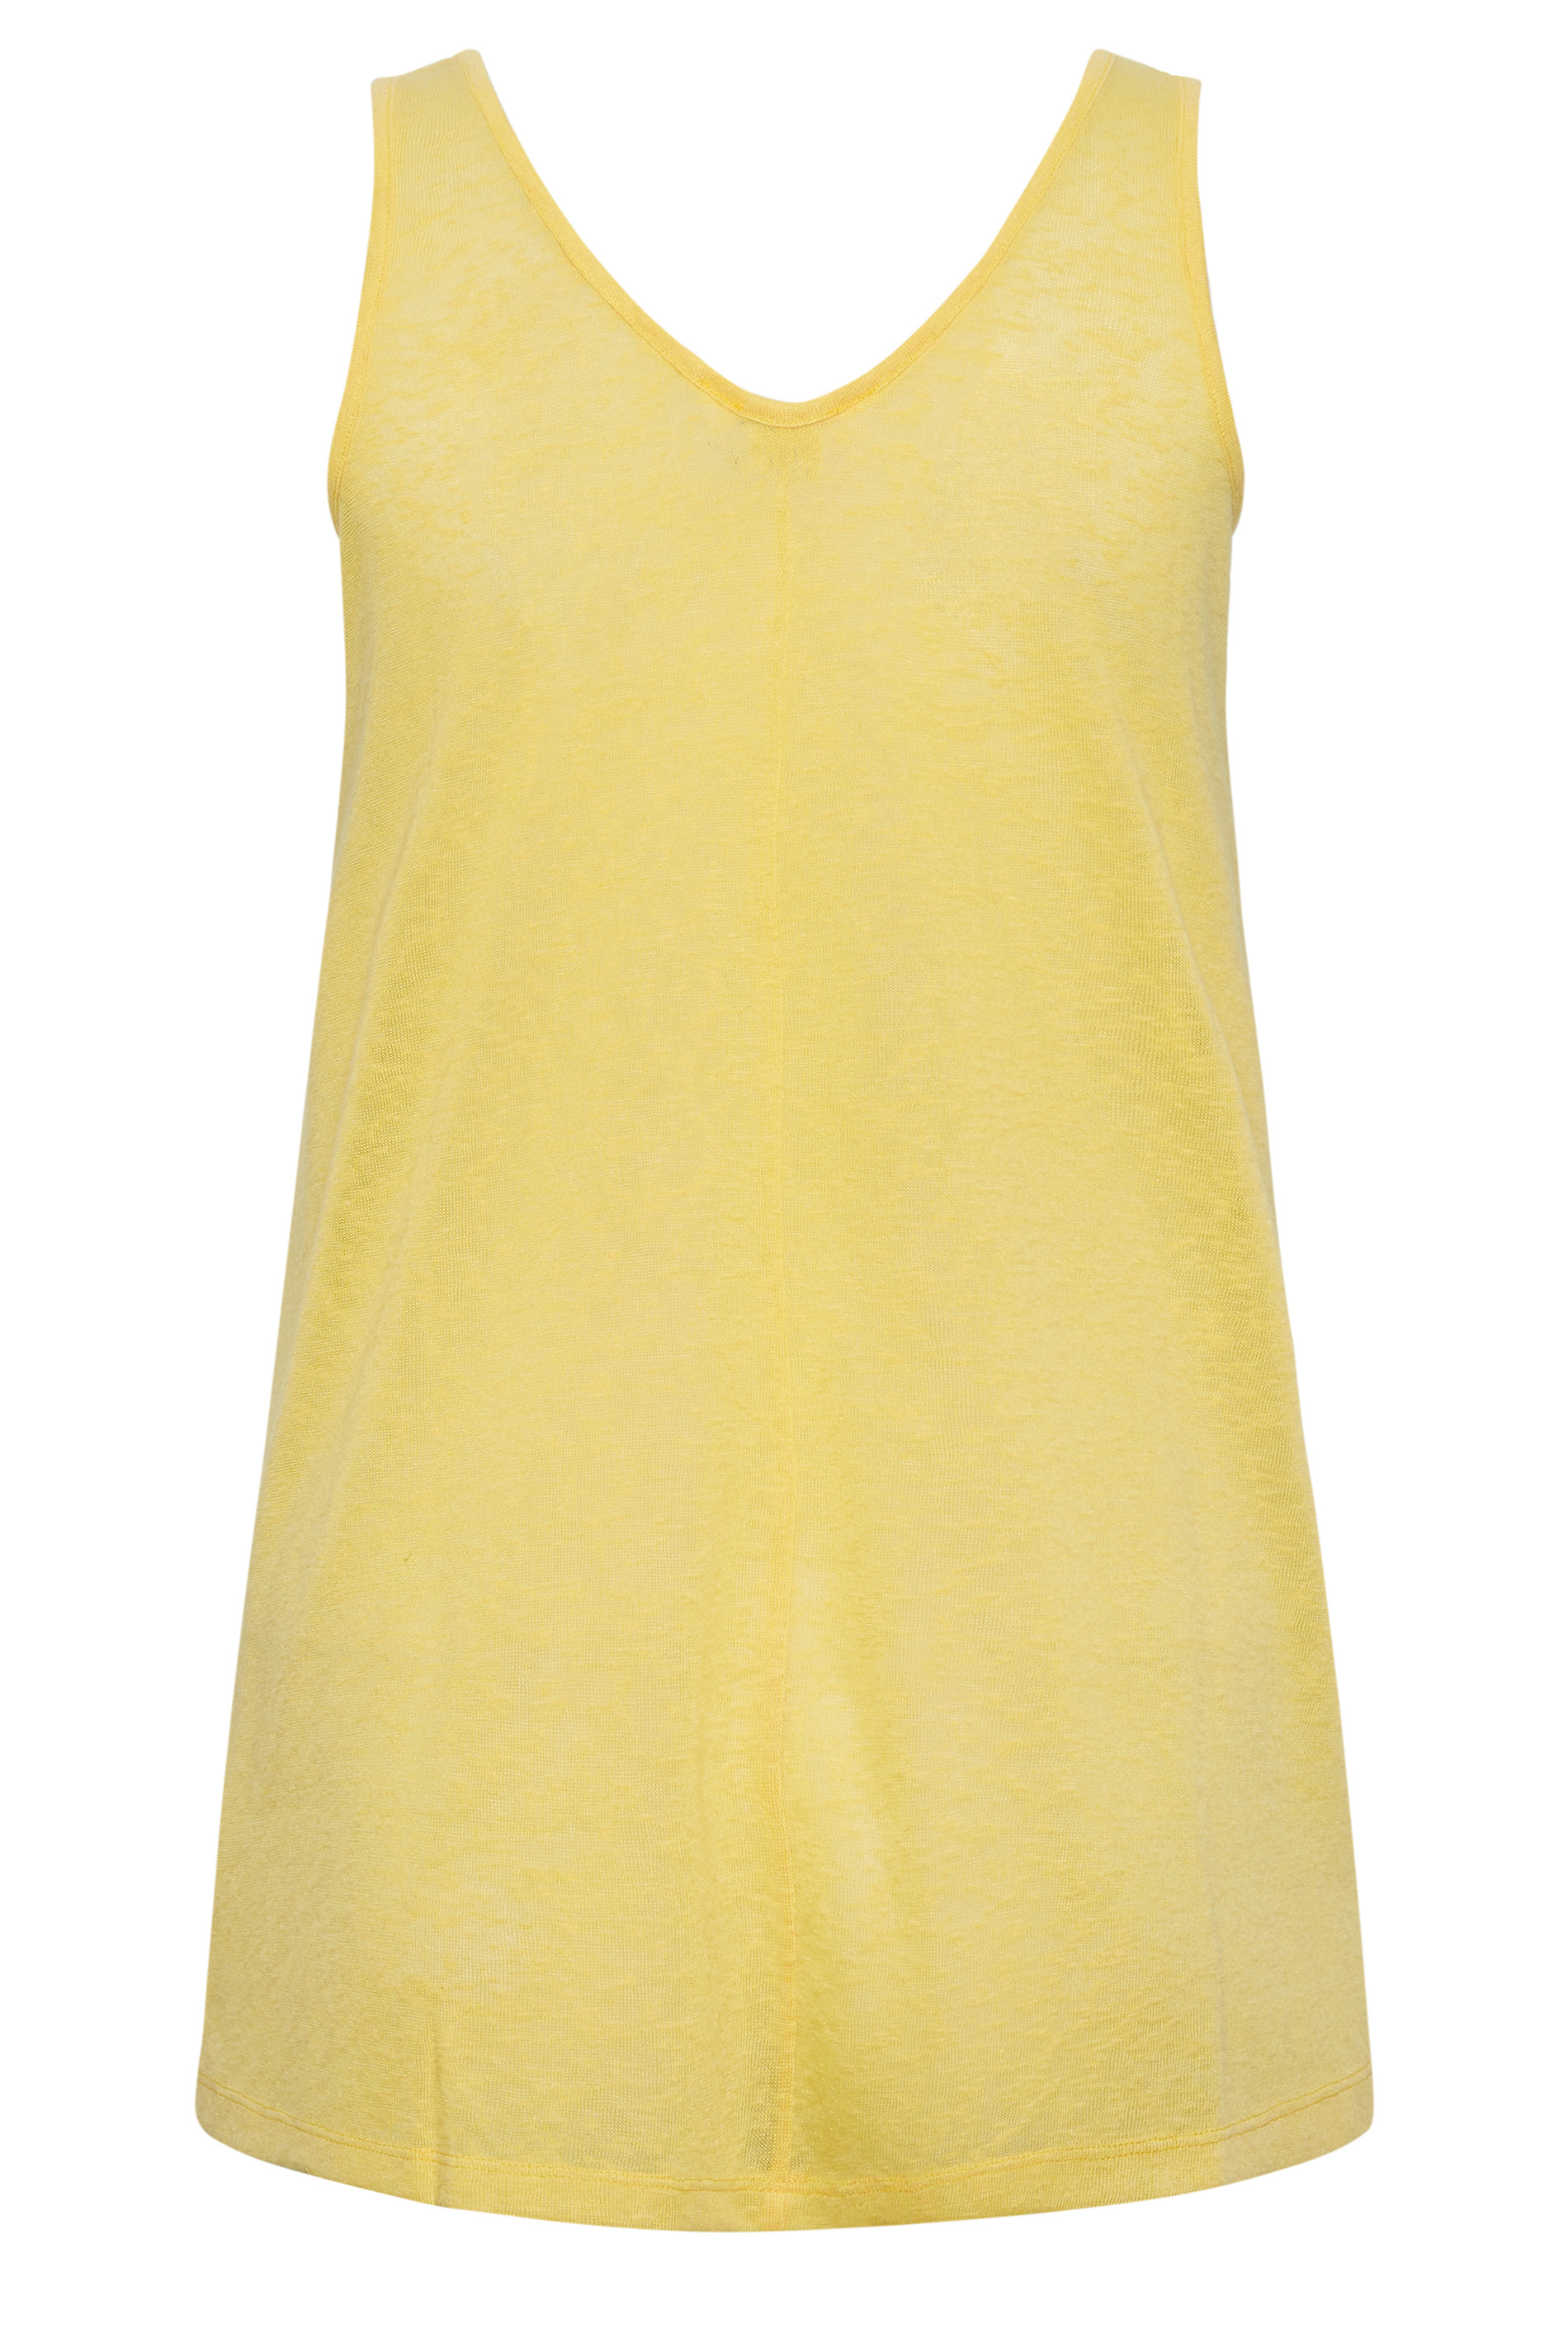 YOURS Curve Plus Size Yellow Linen Look Vest Top | Yours Clothing